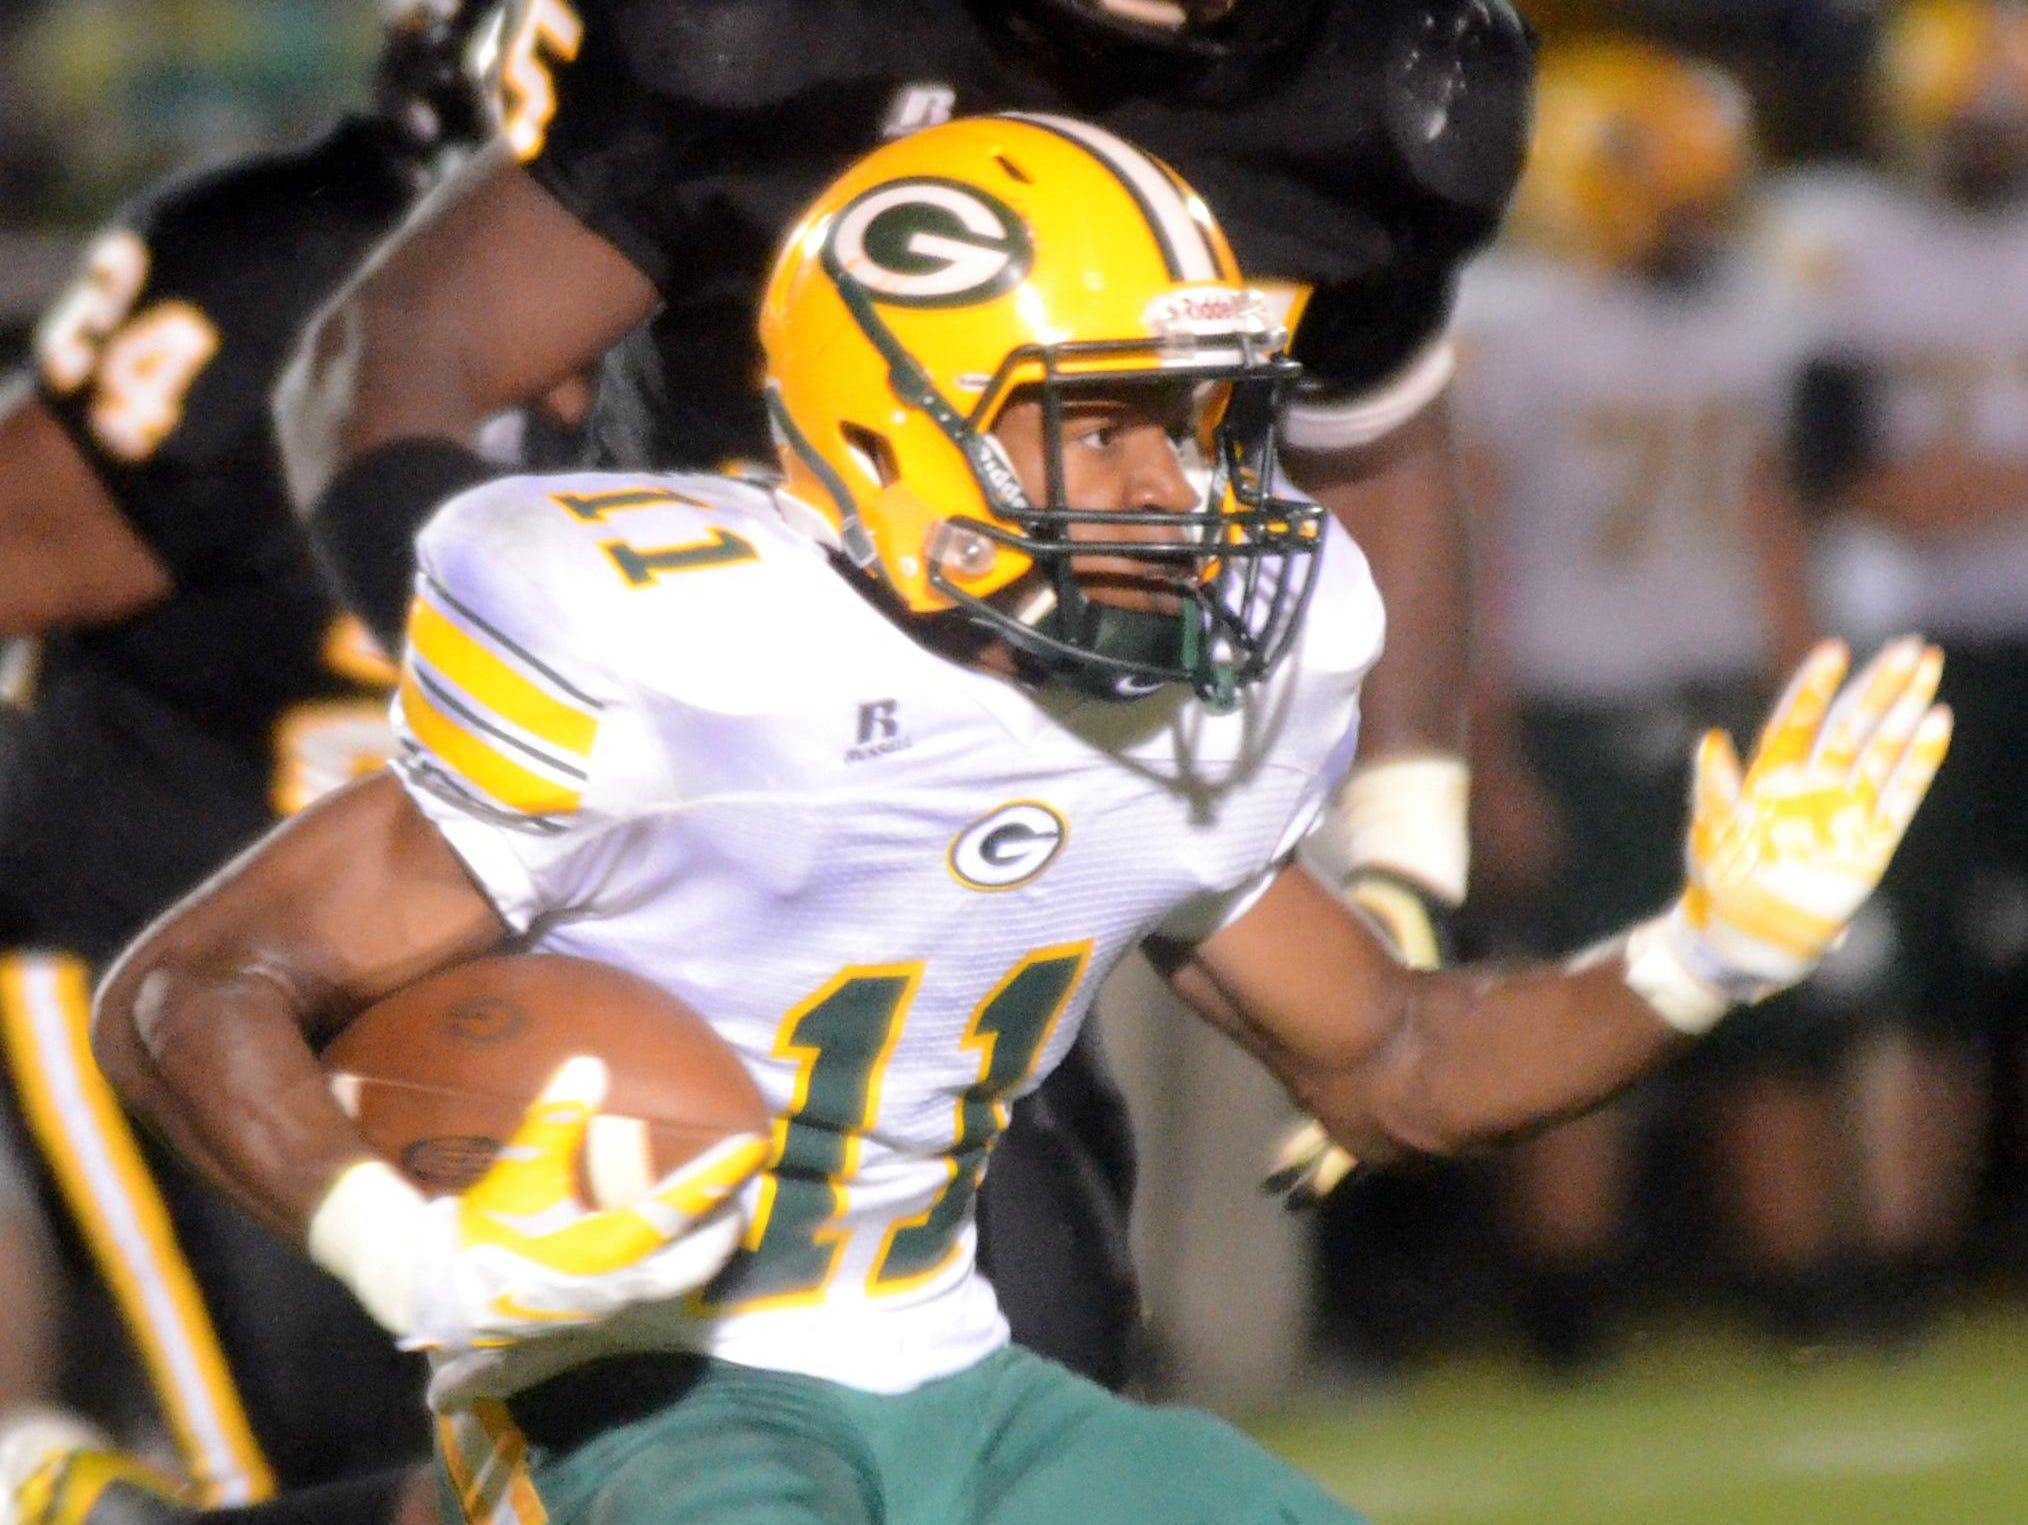 Gallatin High junior Dezmond Chambers carries the football during the second quarter.